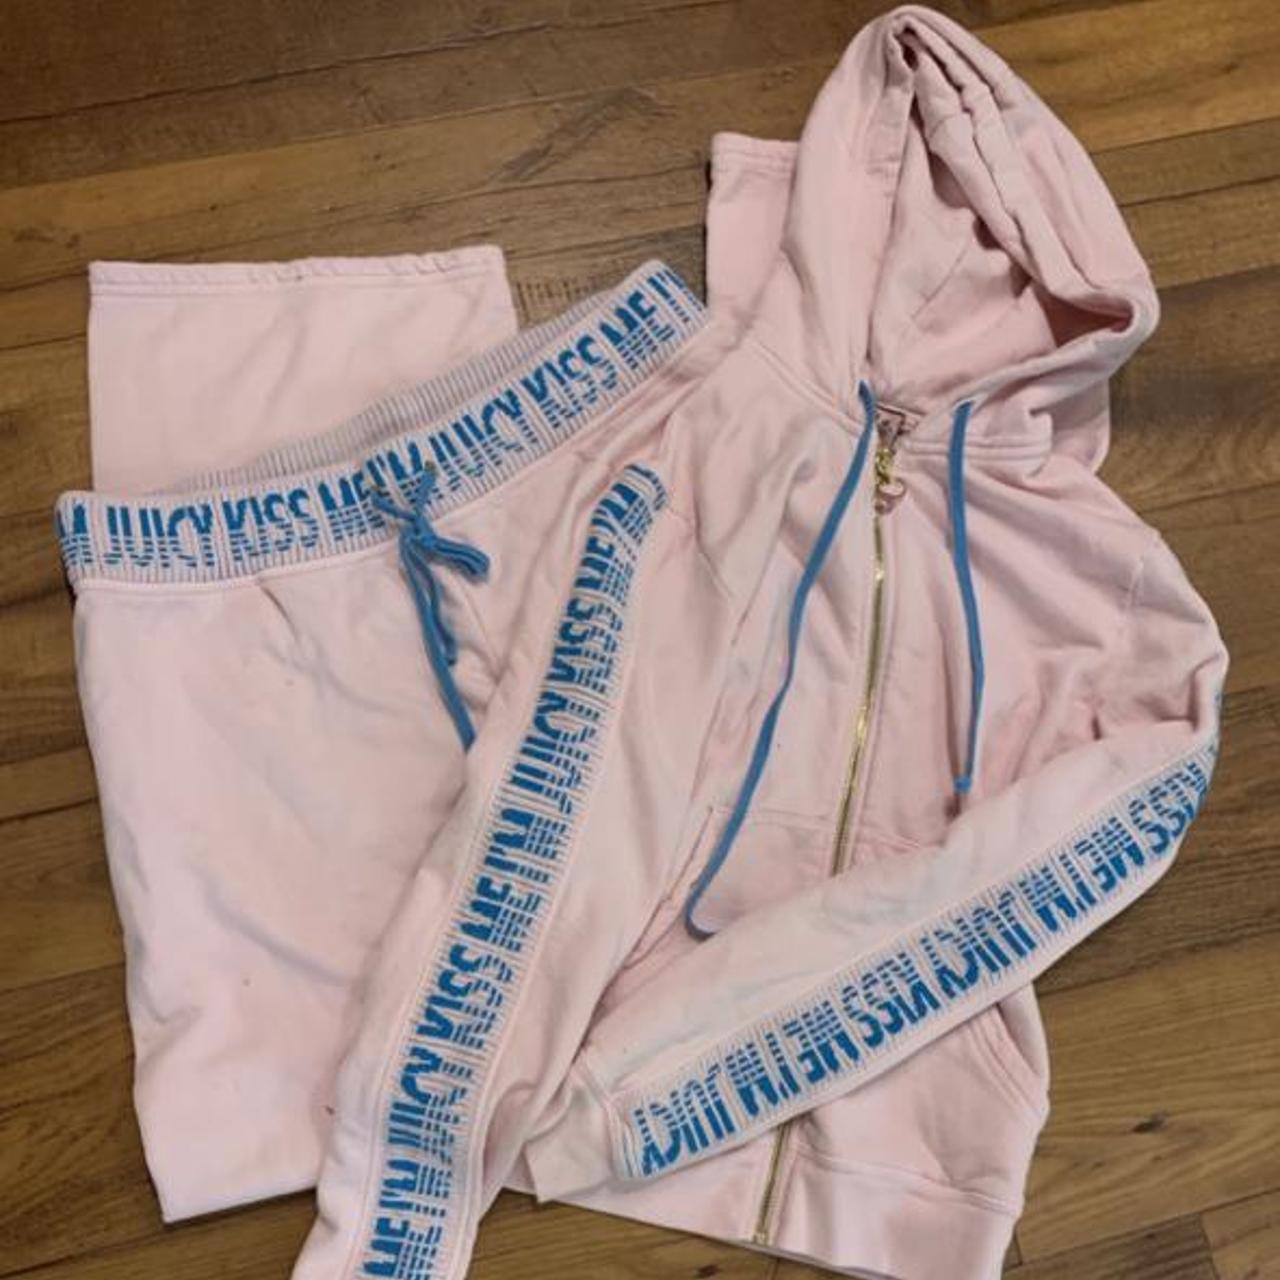 Best Tracksuit Sets: Juicy Couture, Nike, adidas